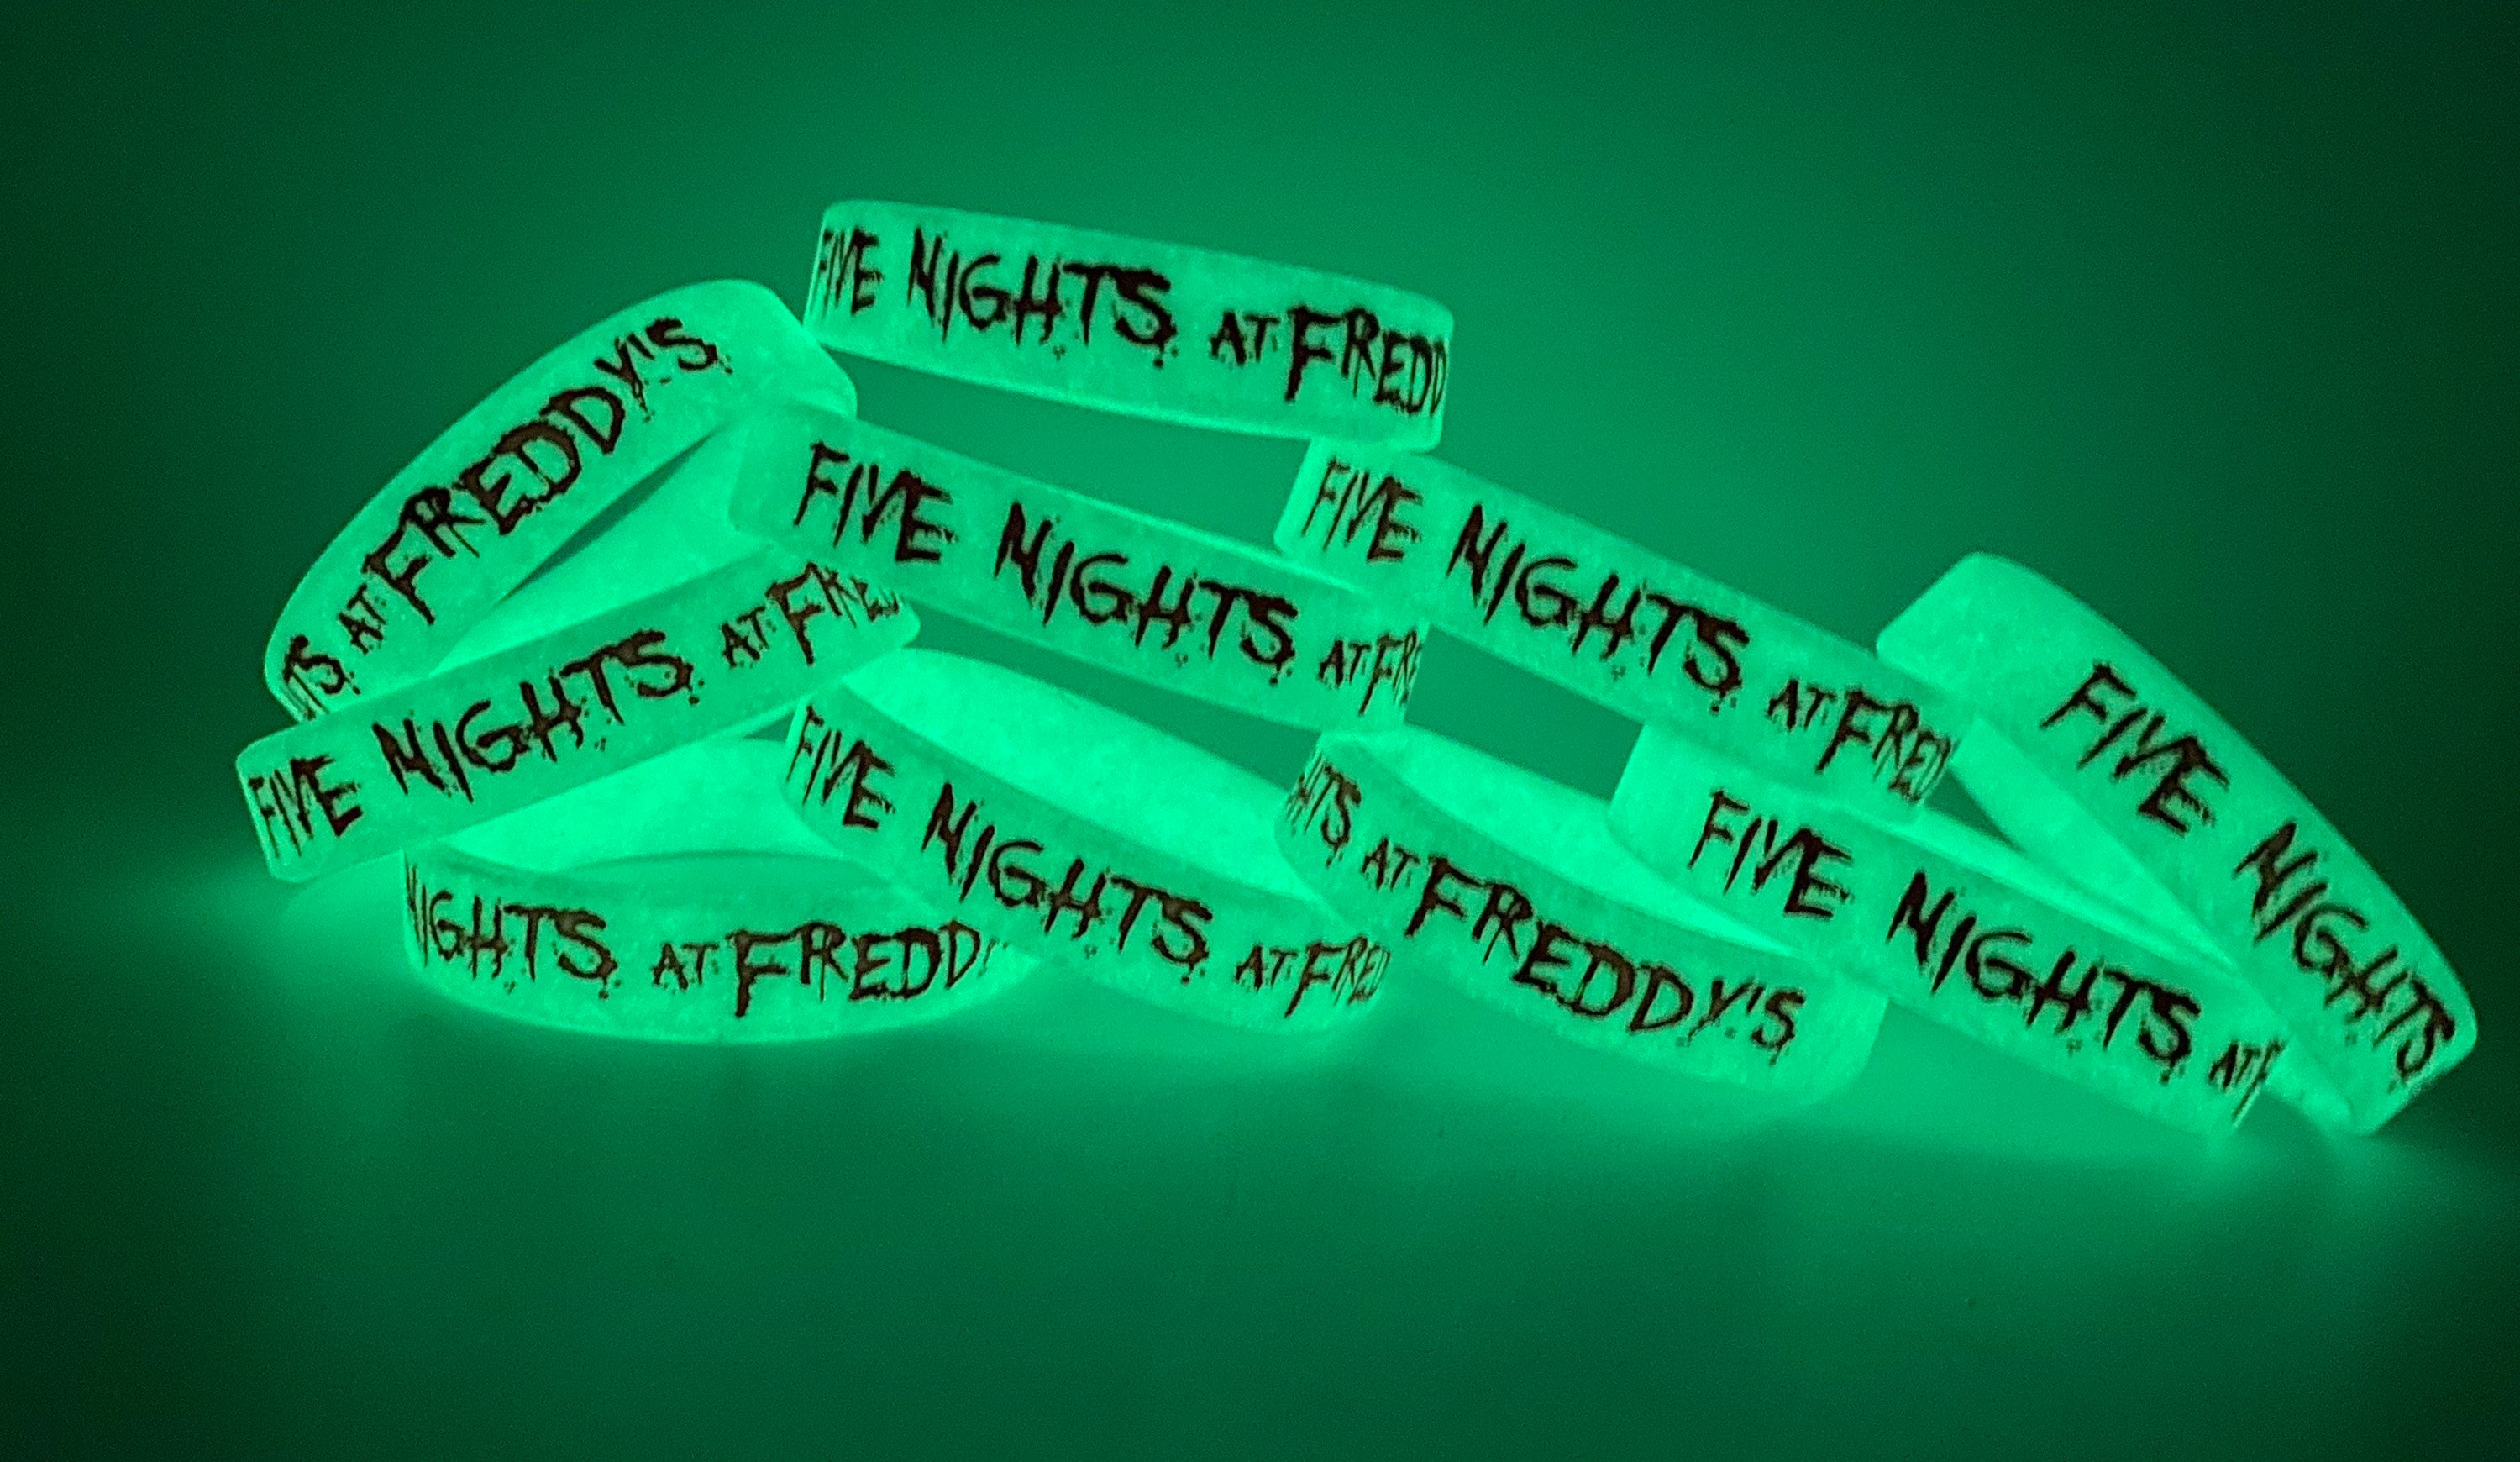 Five Nights at Freddys 20oz Water Bottle Birthday Party WRISTBANDS